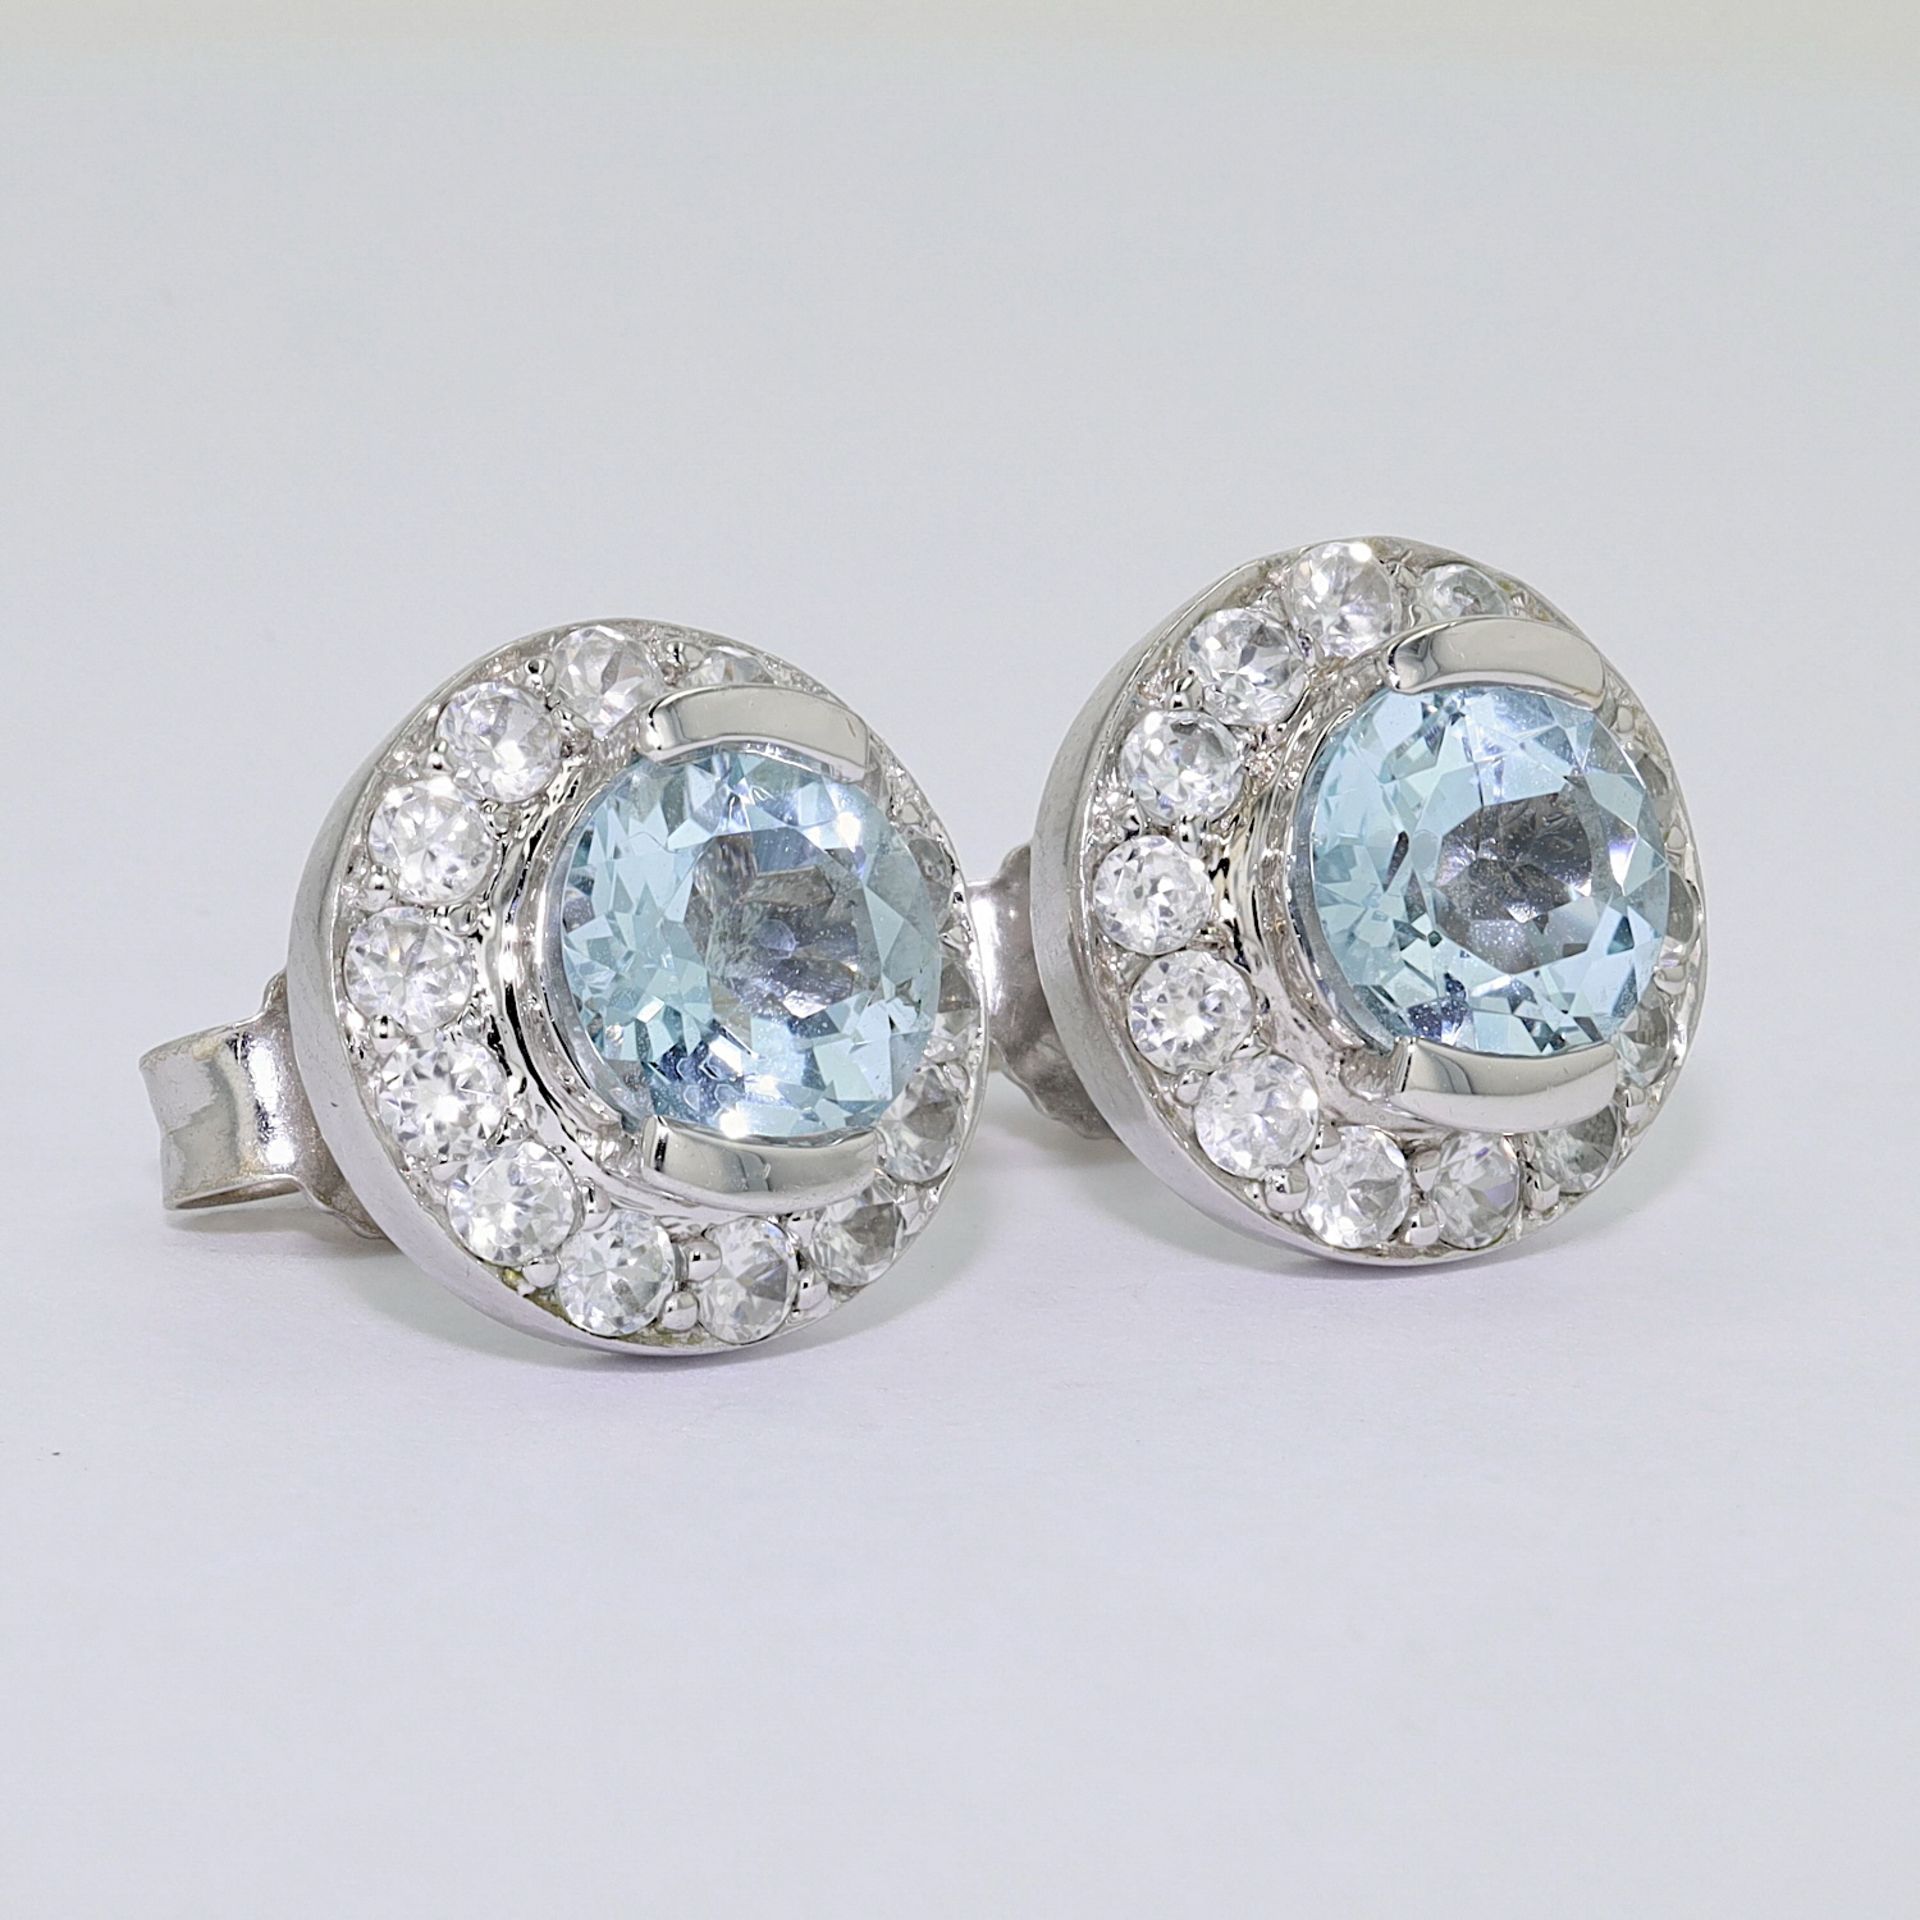 1 pair of stud earrings with topazes and zirconia - Image 3 of 4